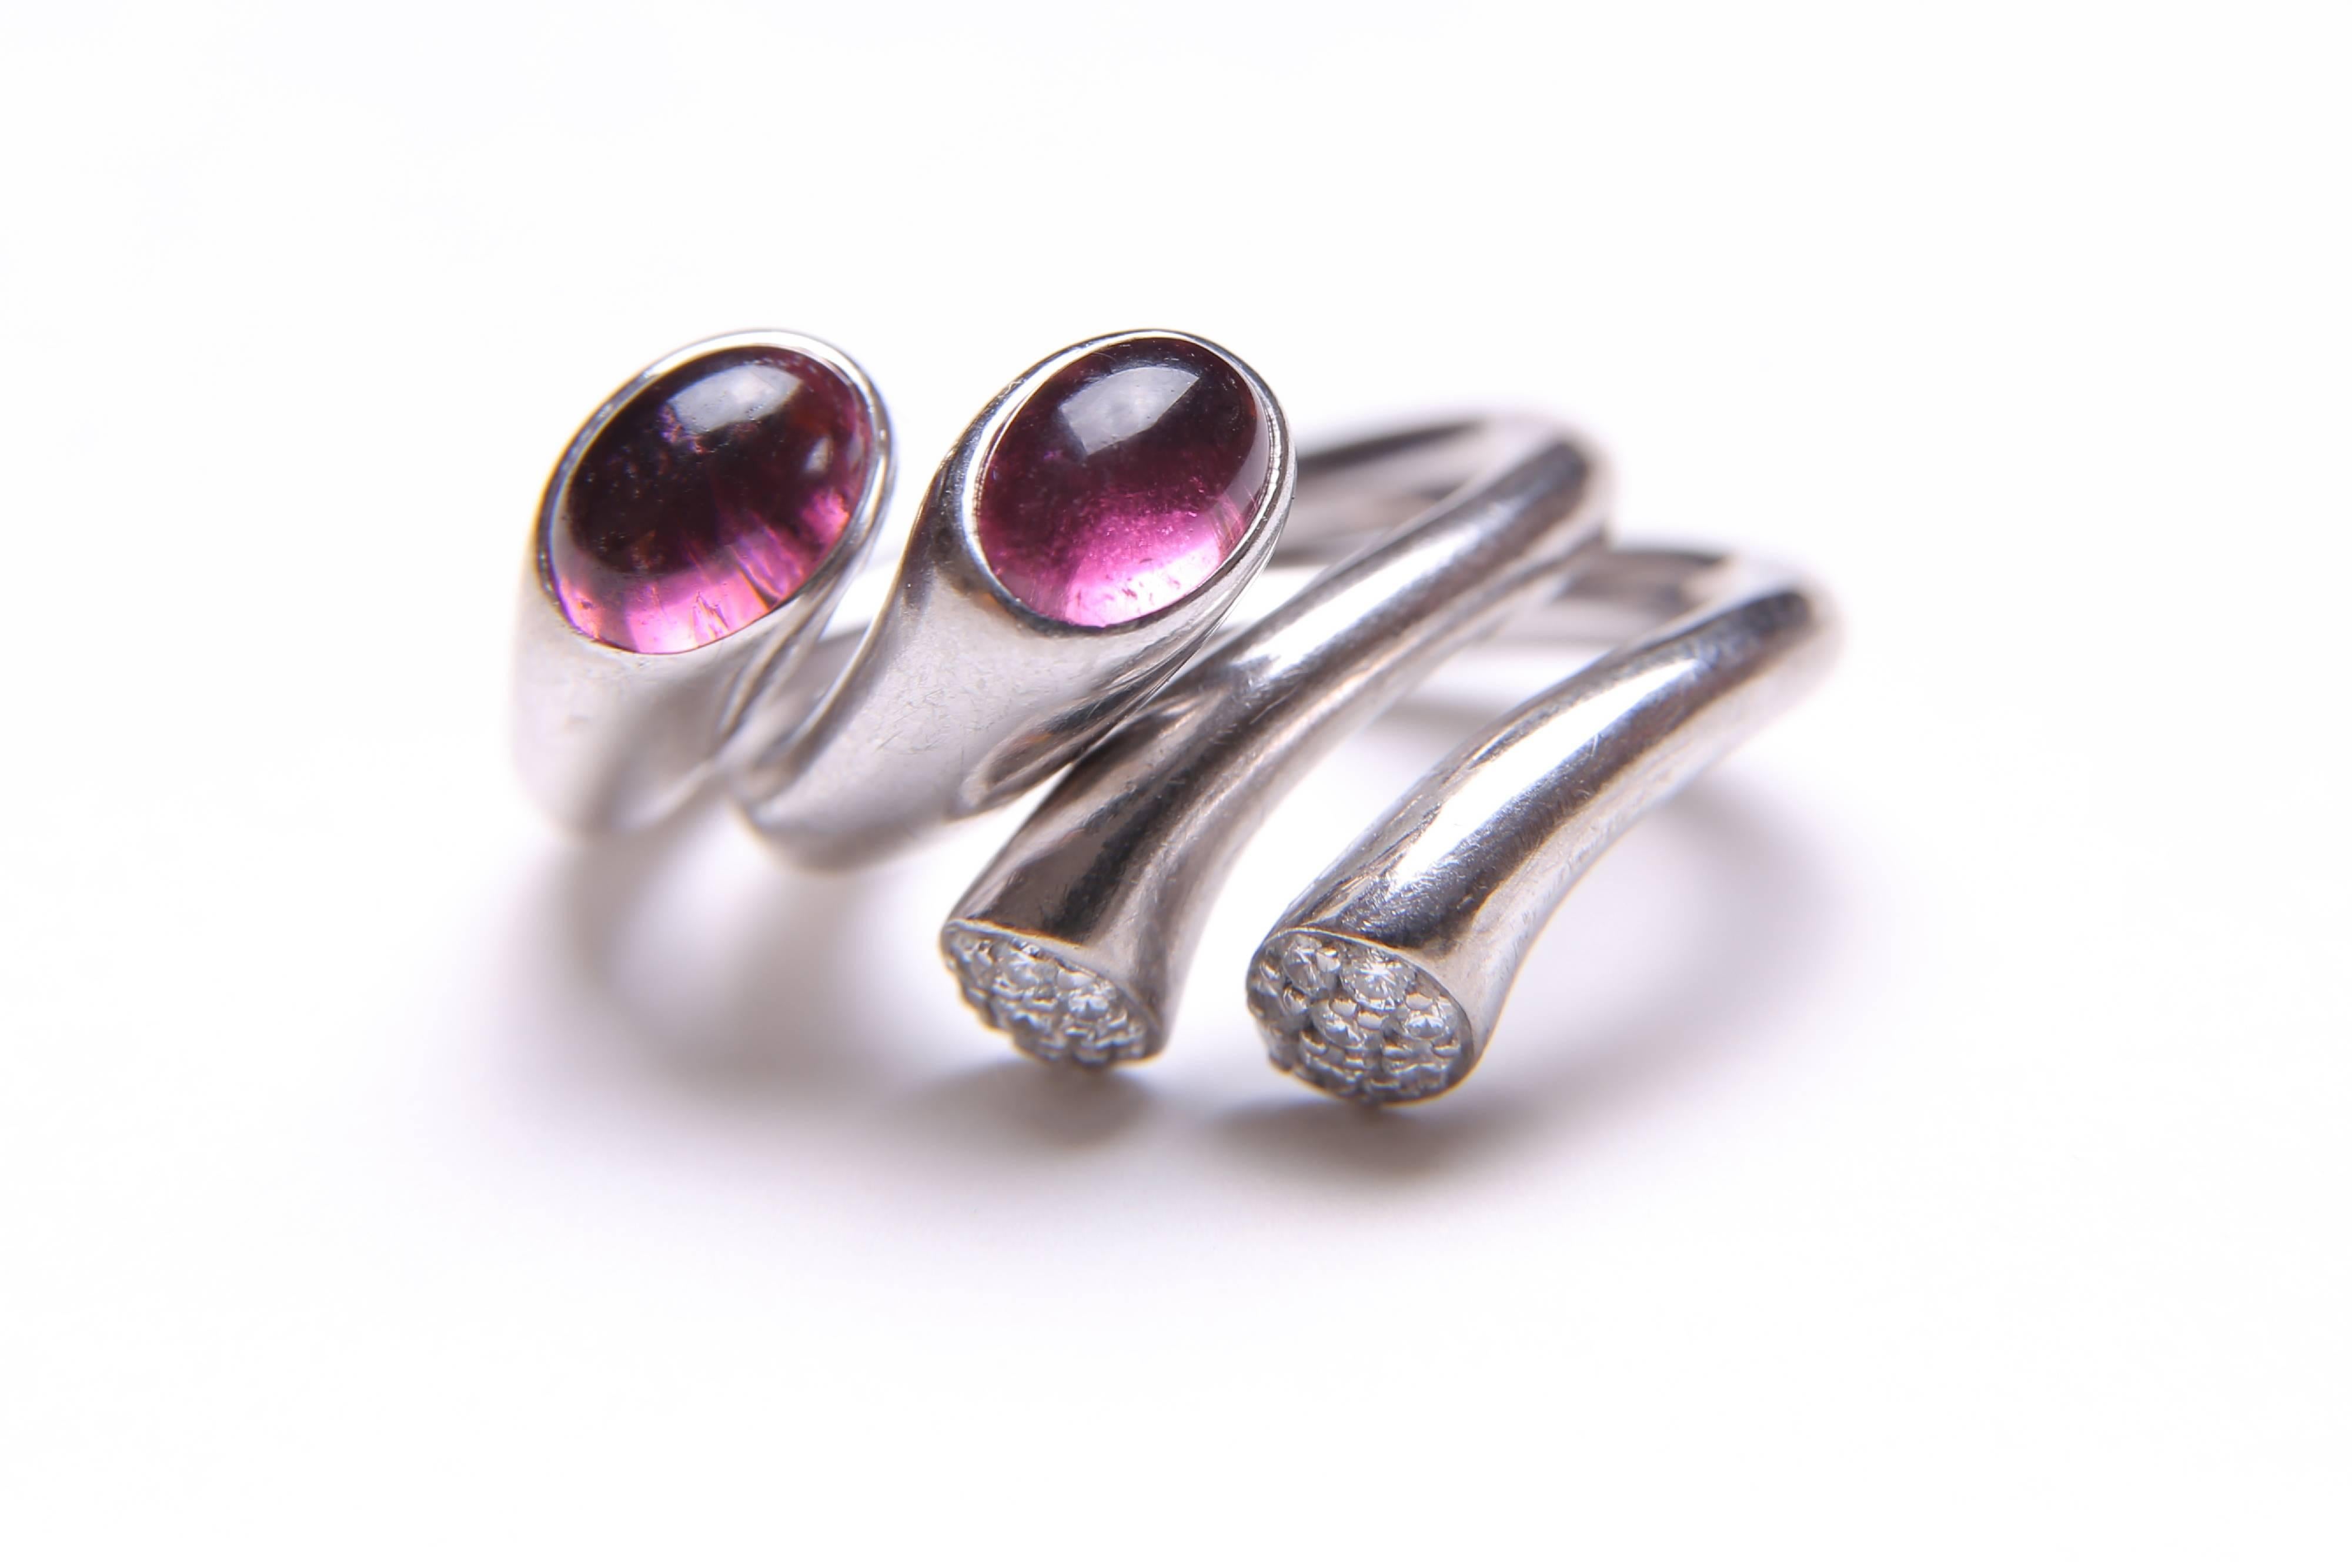 Georg Jensen - two white gold diamond and tourmaline Carnival rings. The designer is Regitze Overgaard. Each is designed as an open band, with oval pink tourmaline cabochon and pave-set diamond asymmetrical terminals. Each stamped 750 and with the